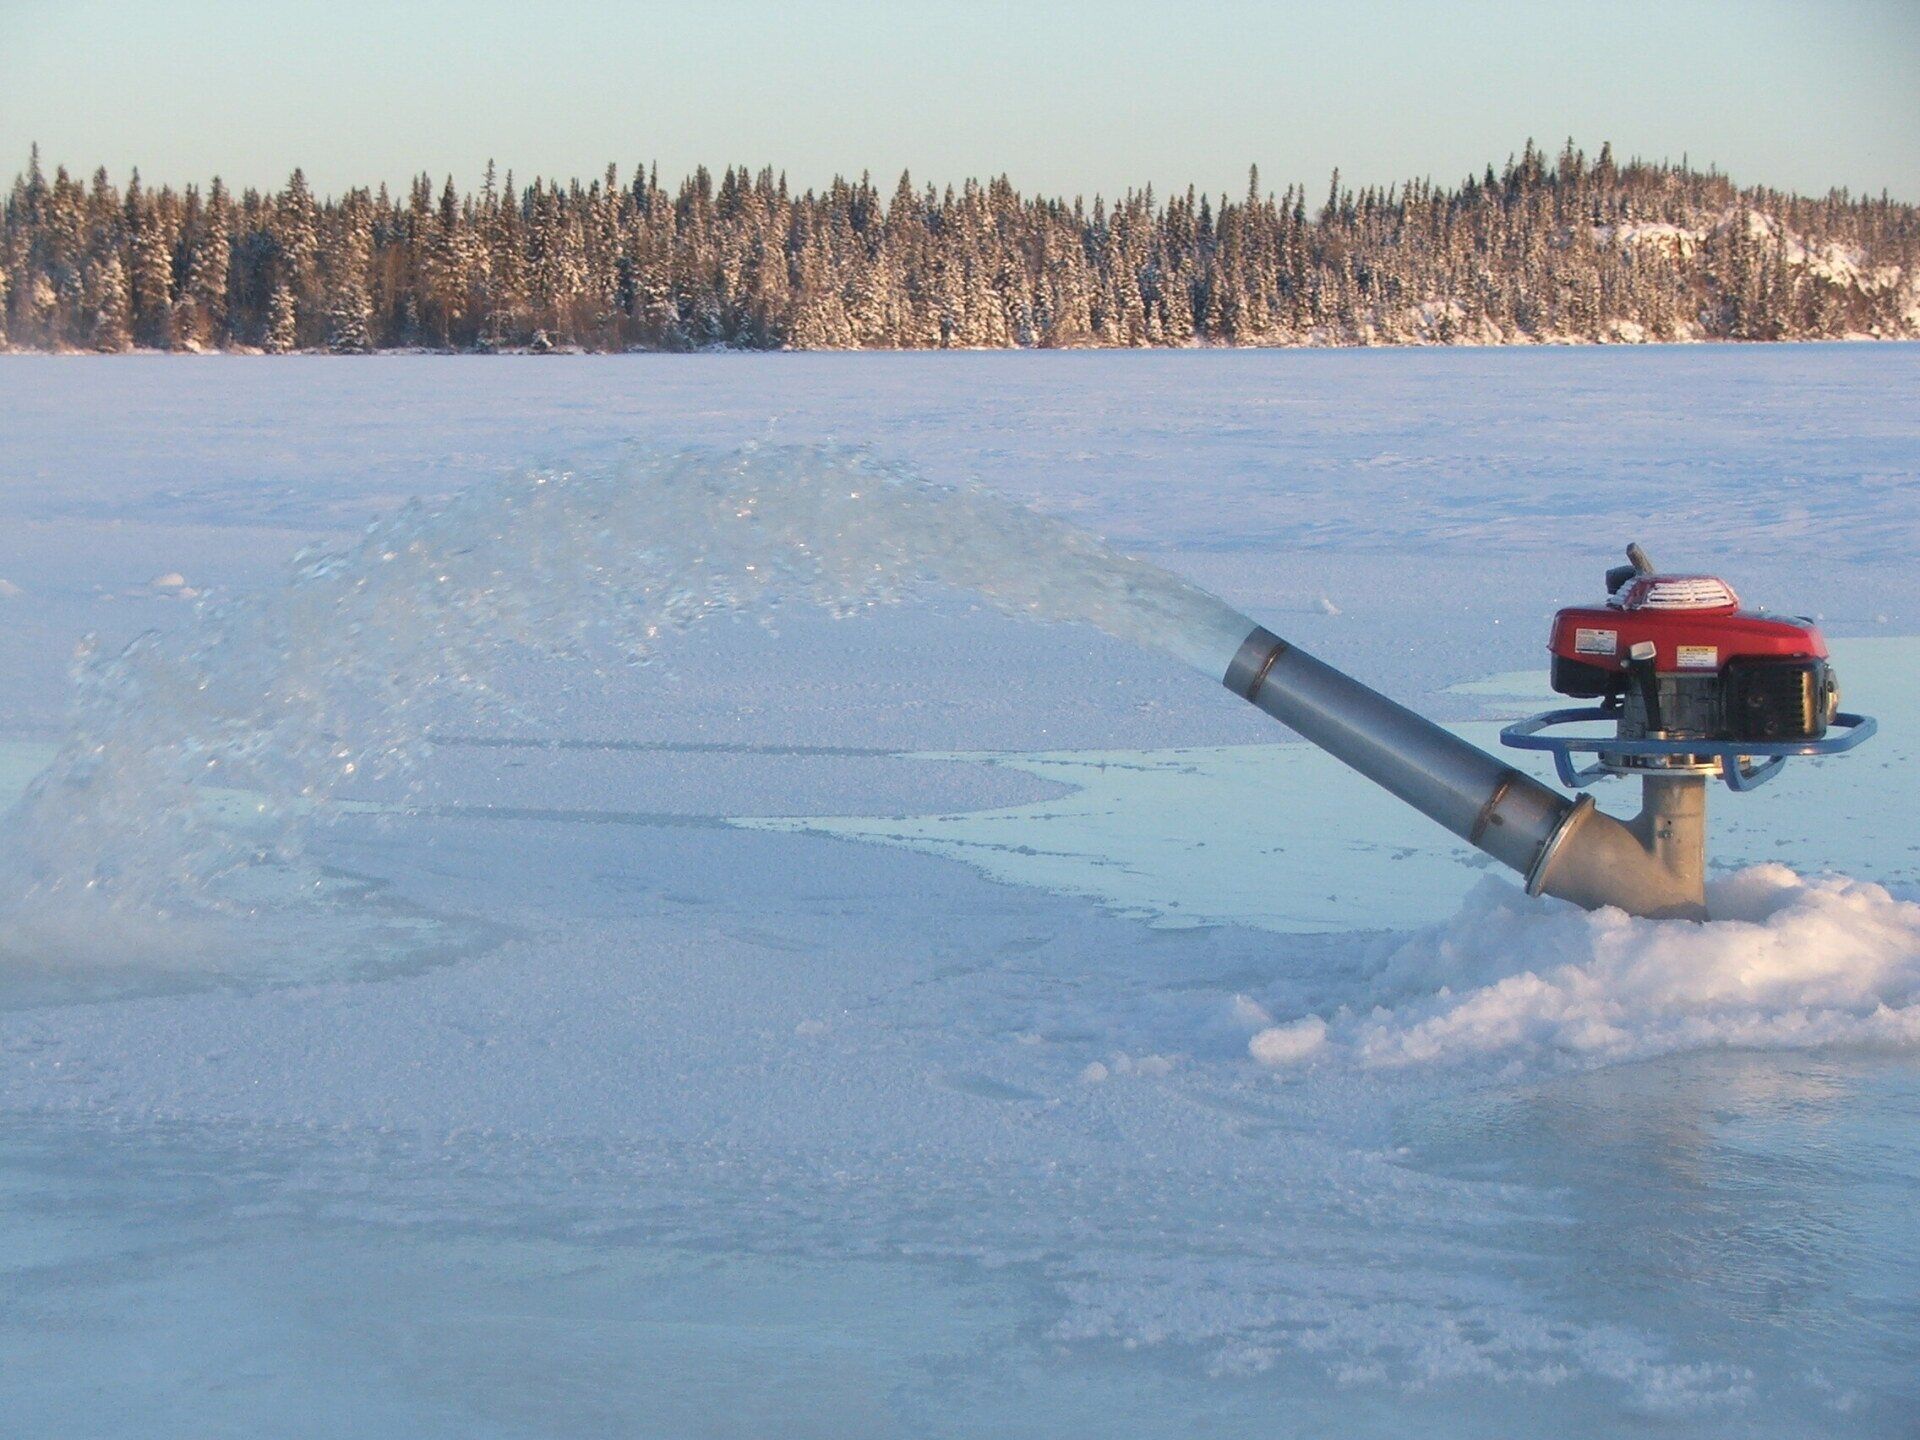 The Big ice B-55 Flood Pump for thickening winter ice roads, river crossings, exploration drill pad.